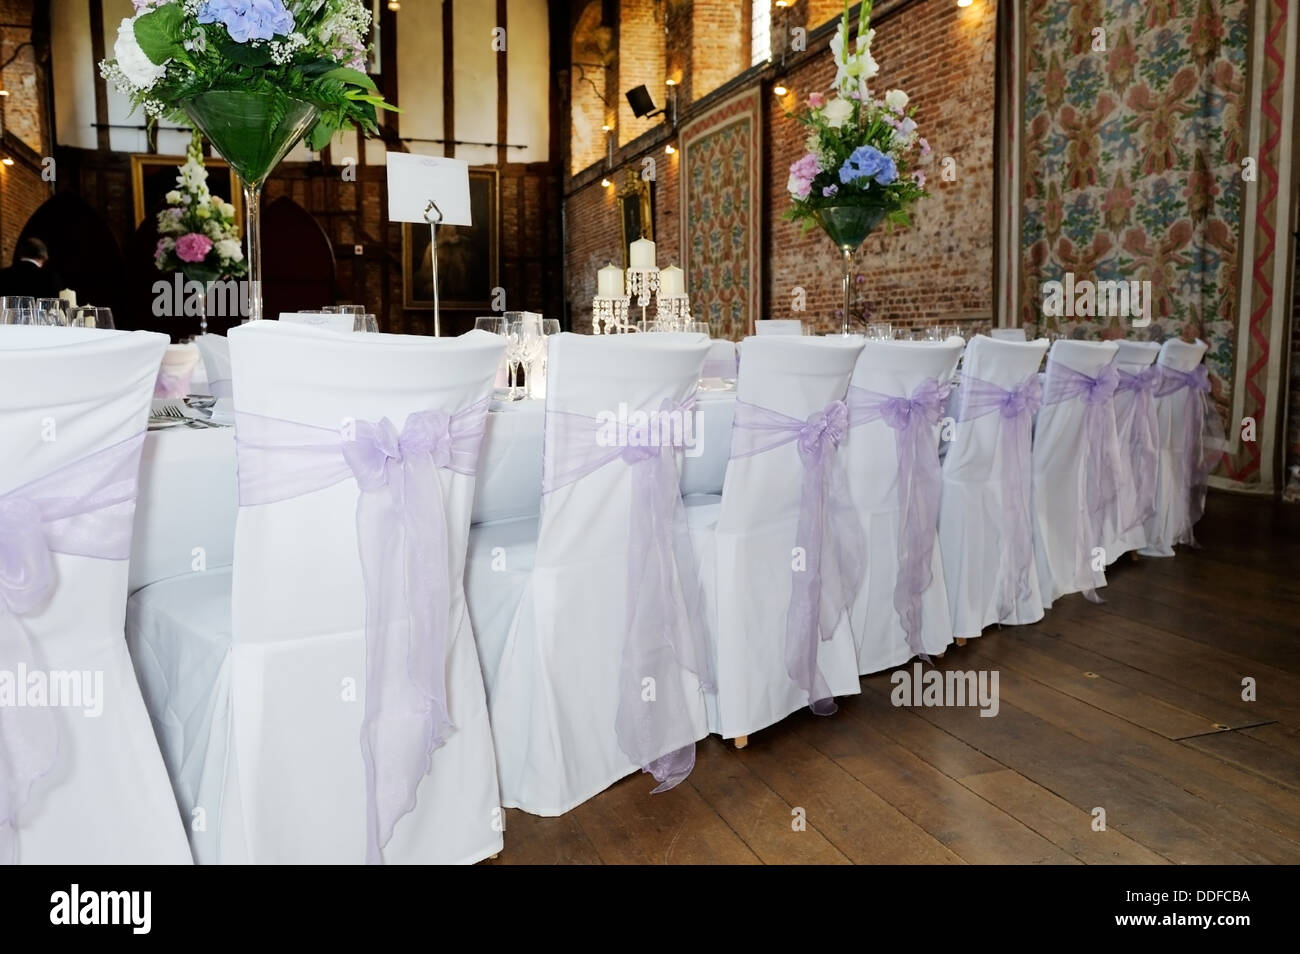 Back of chairs showing white and lilac covers at wedding reception Stock Photo